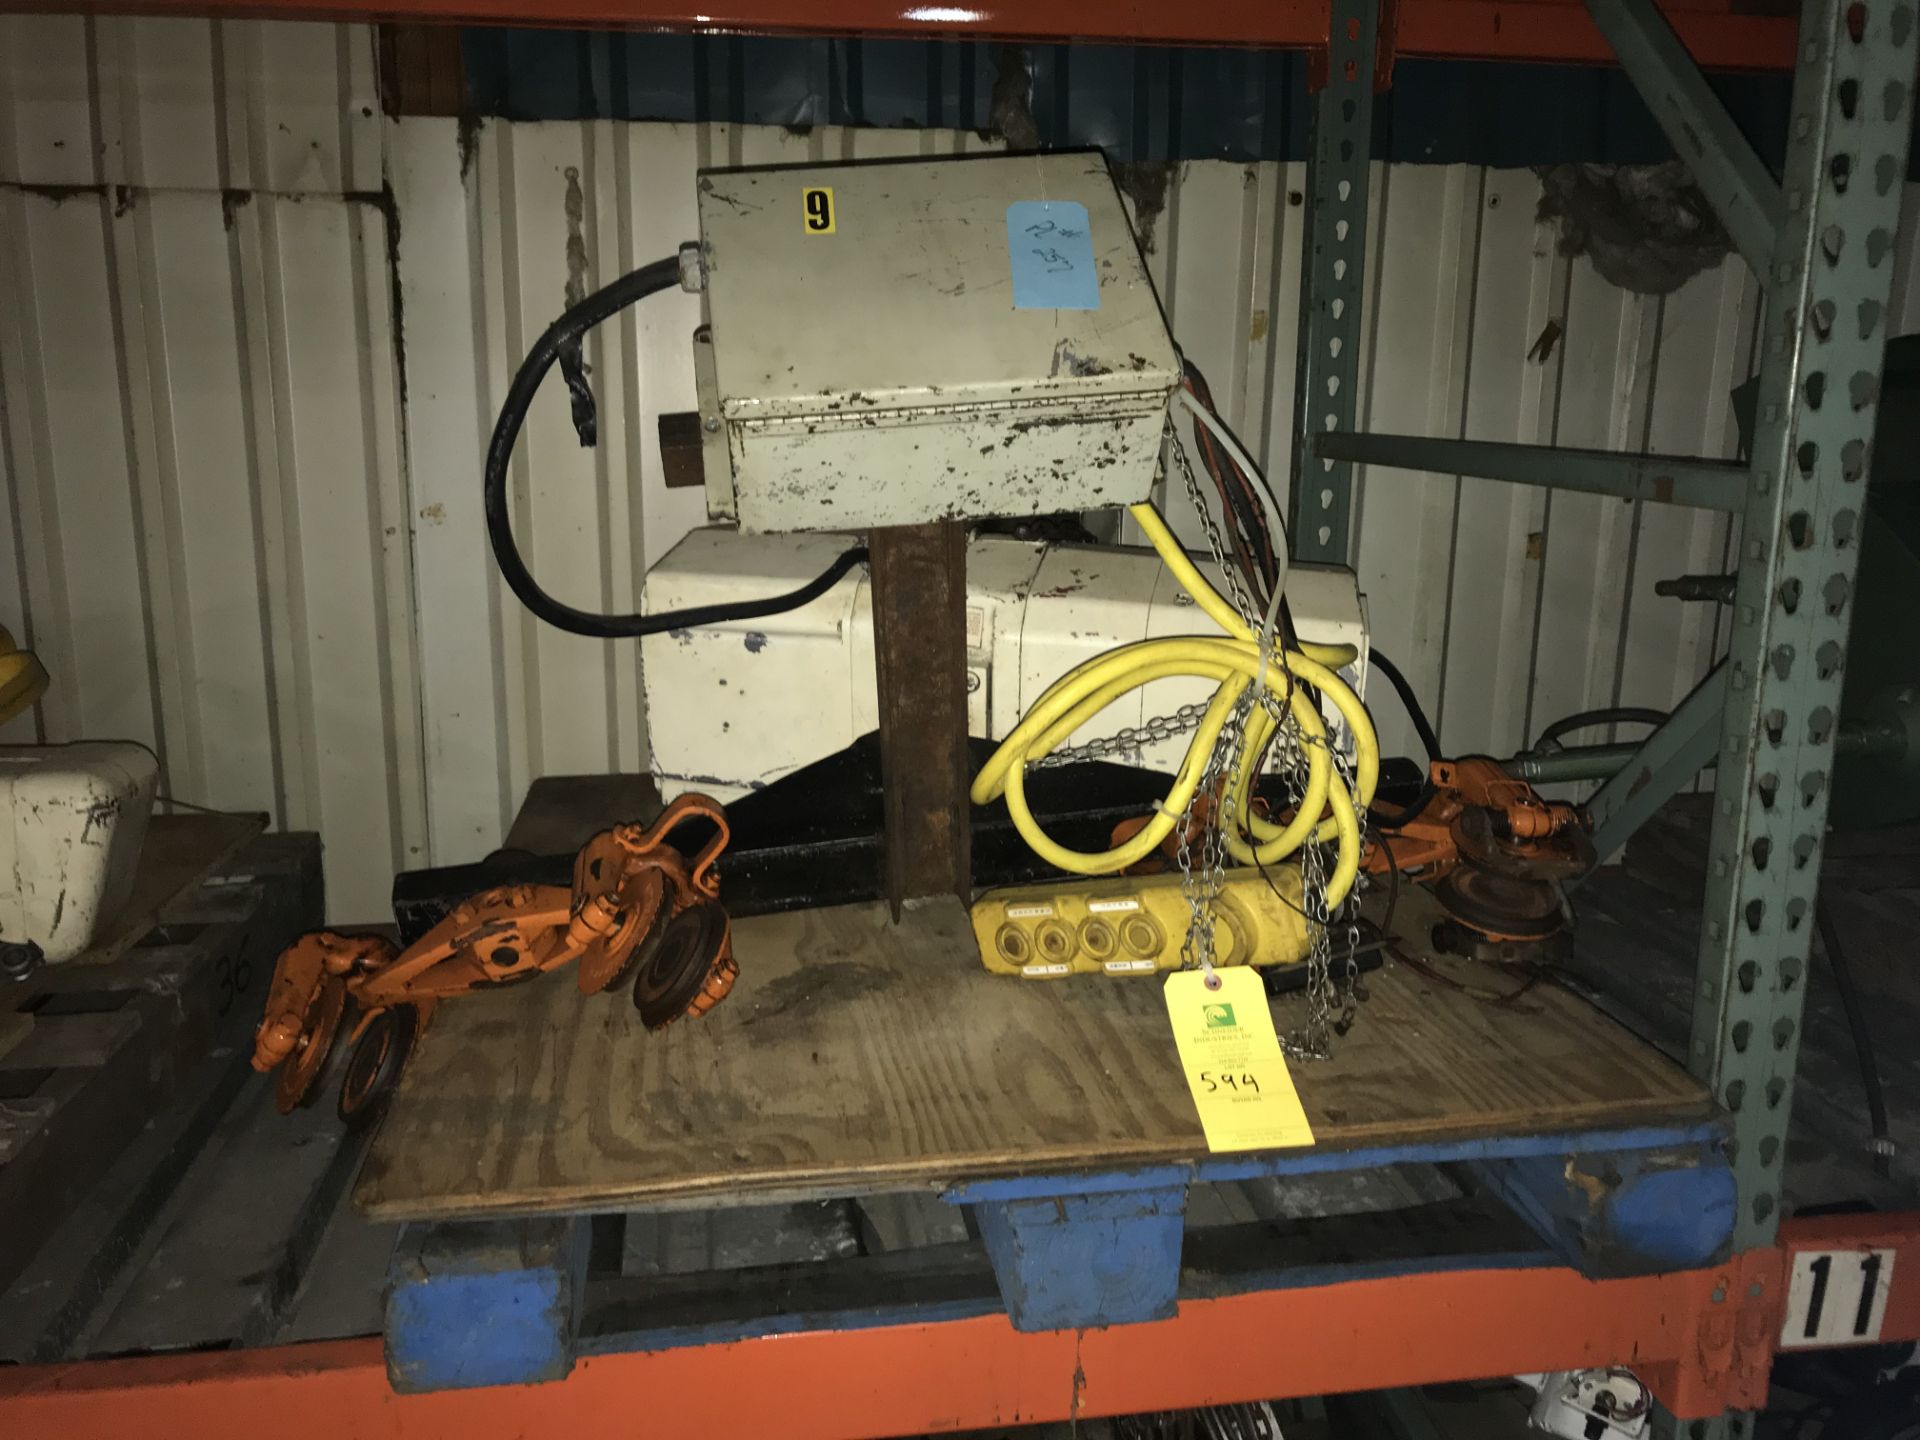 SESCL Chain Hoist, Model# 1700, 2 Ton, Rigging Fee For This Item Is $30 - Image 2 of 3